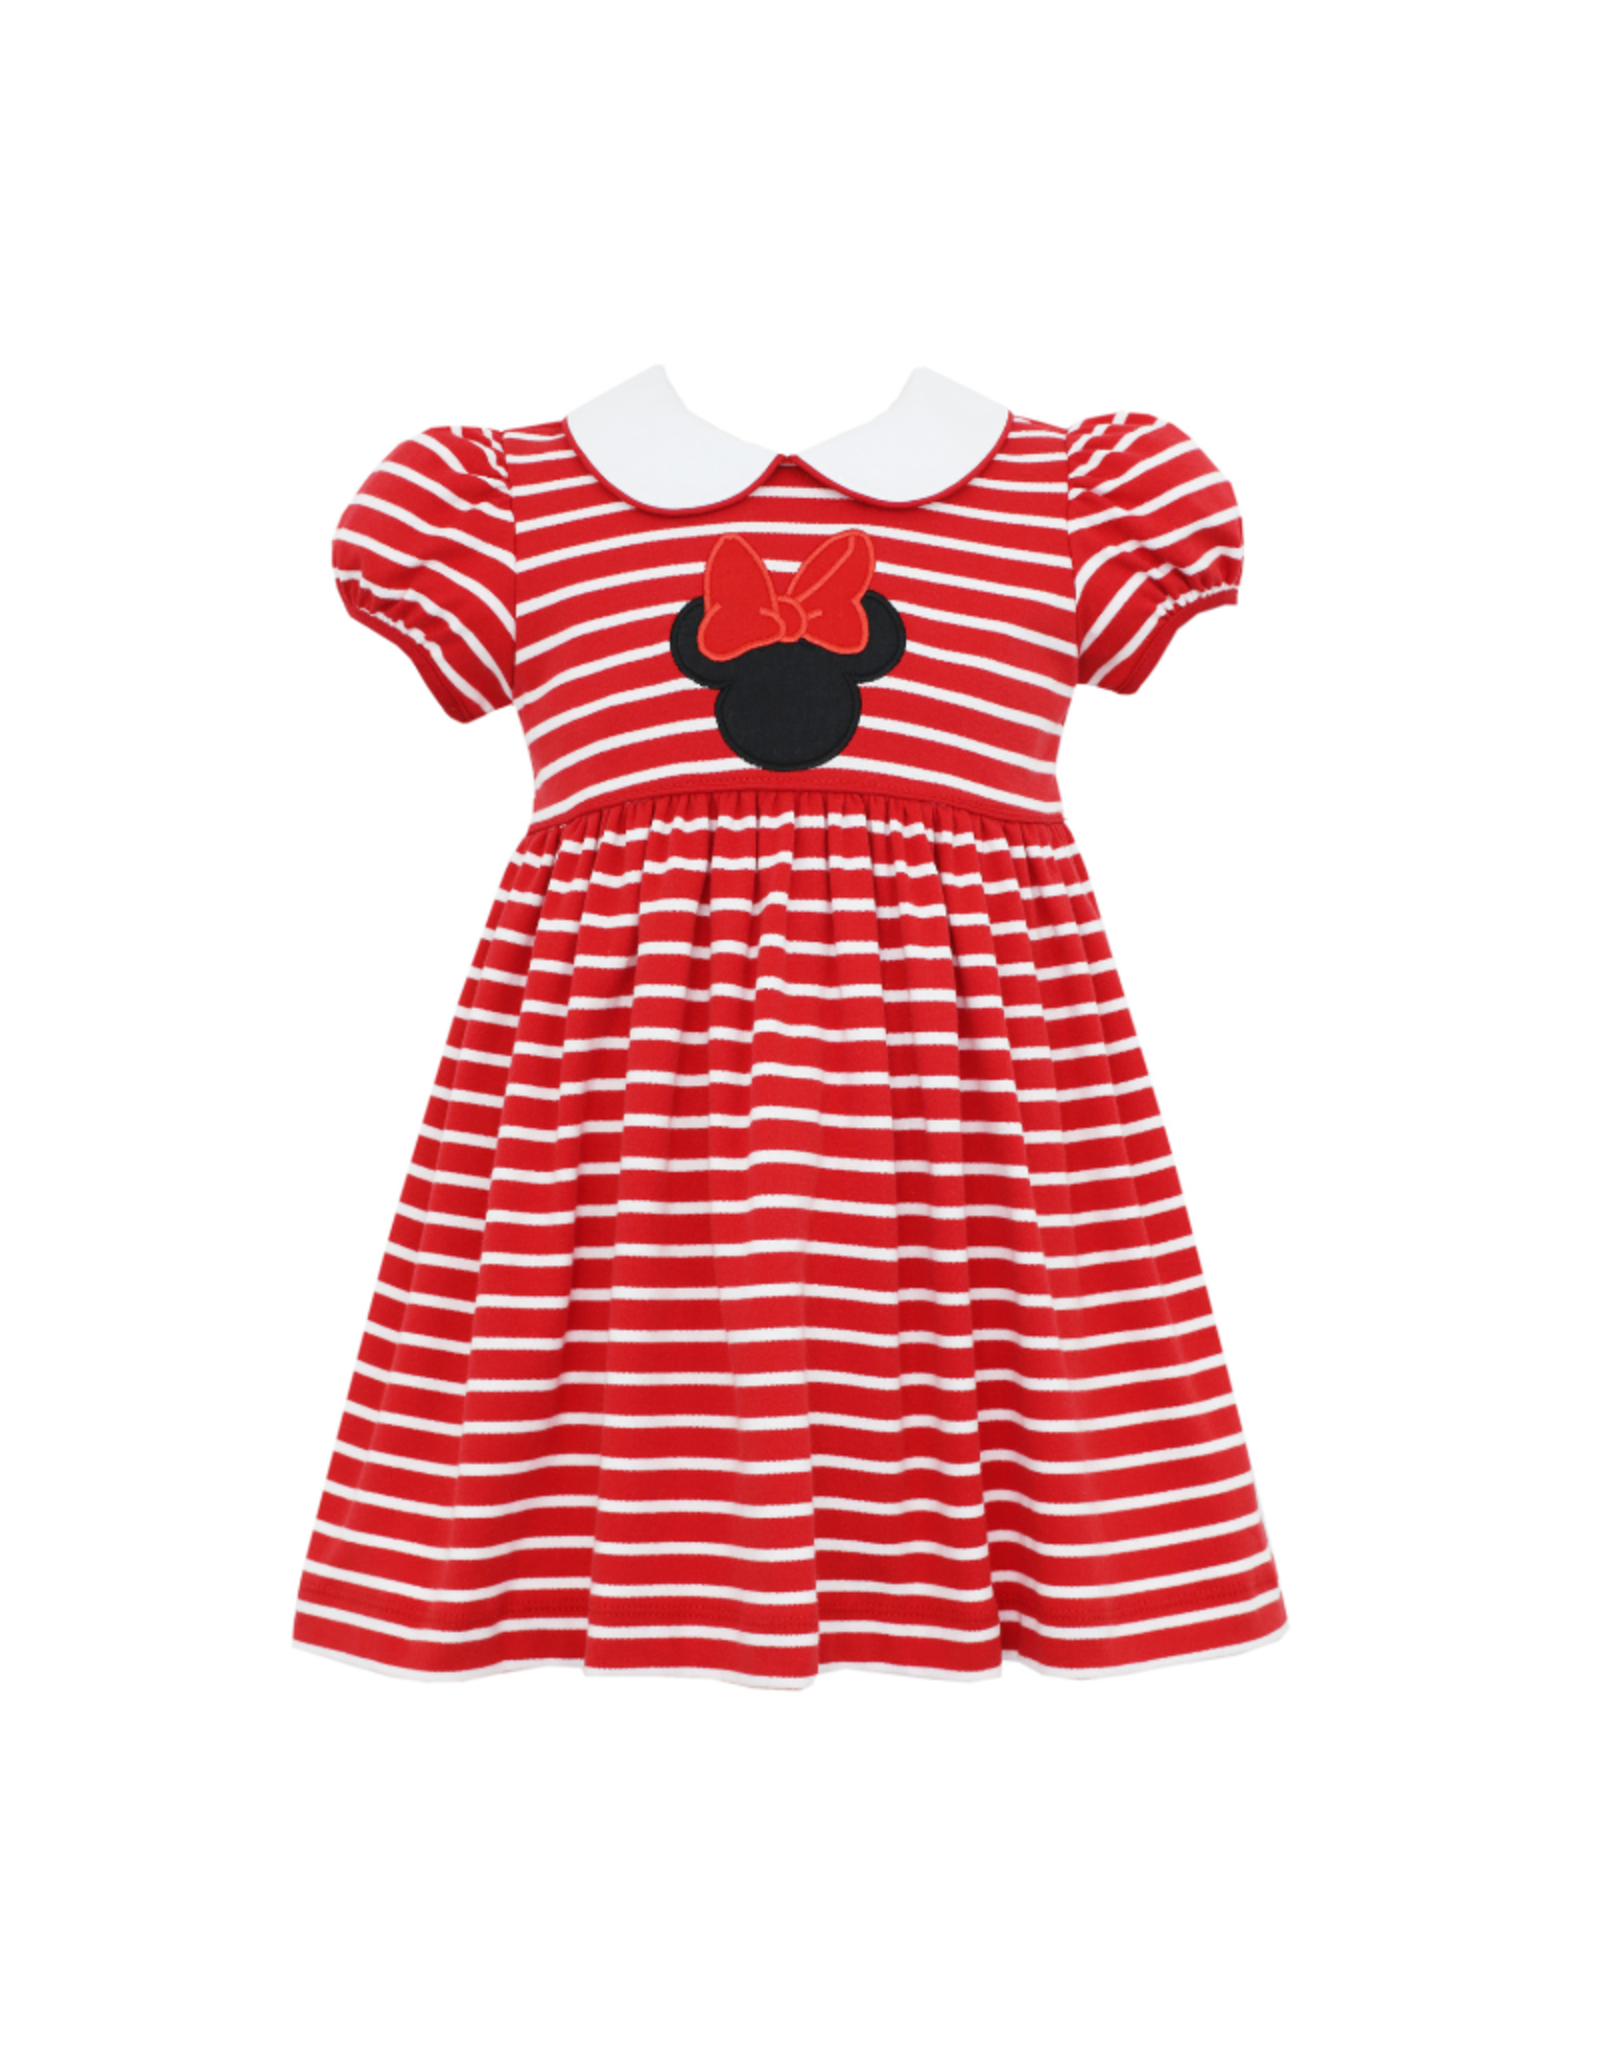 Claire and Charlie Minnie SS Red & White Knit Dress